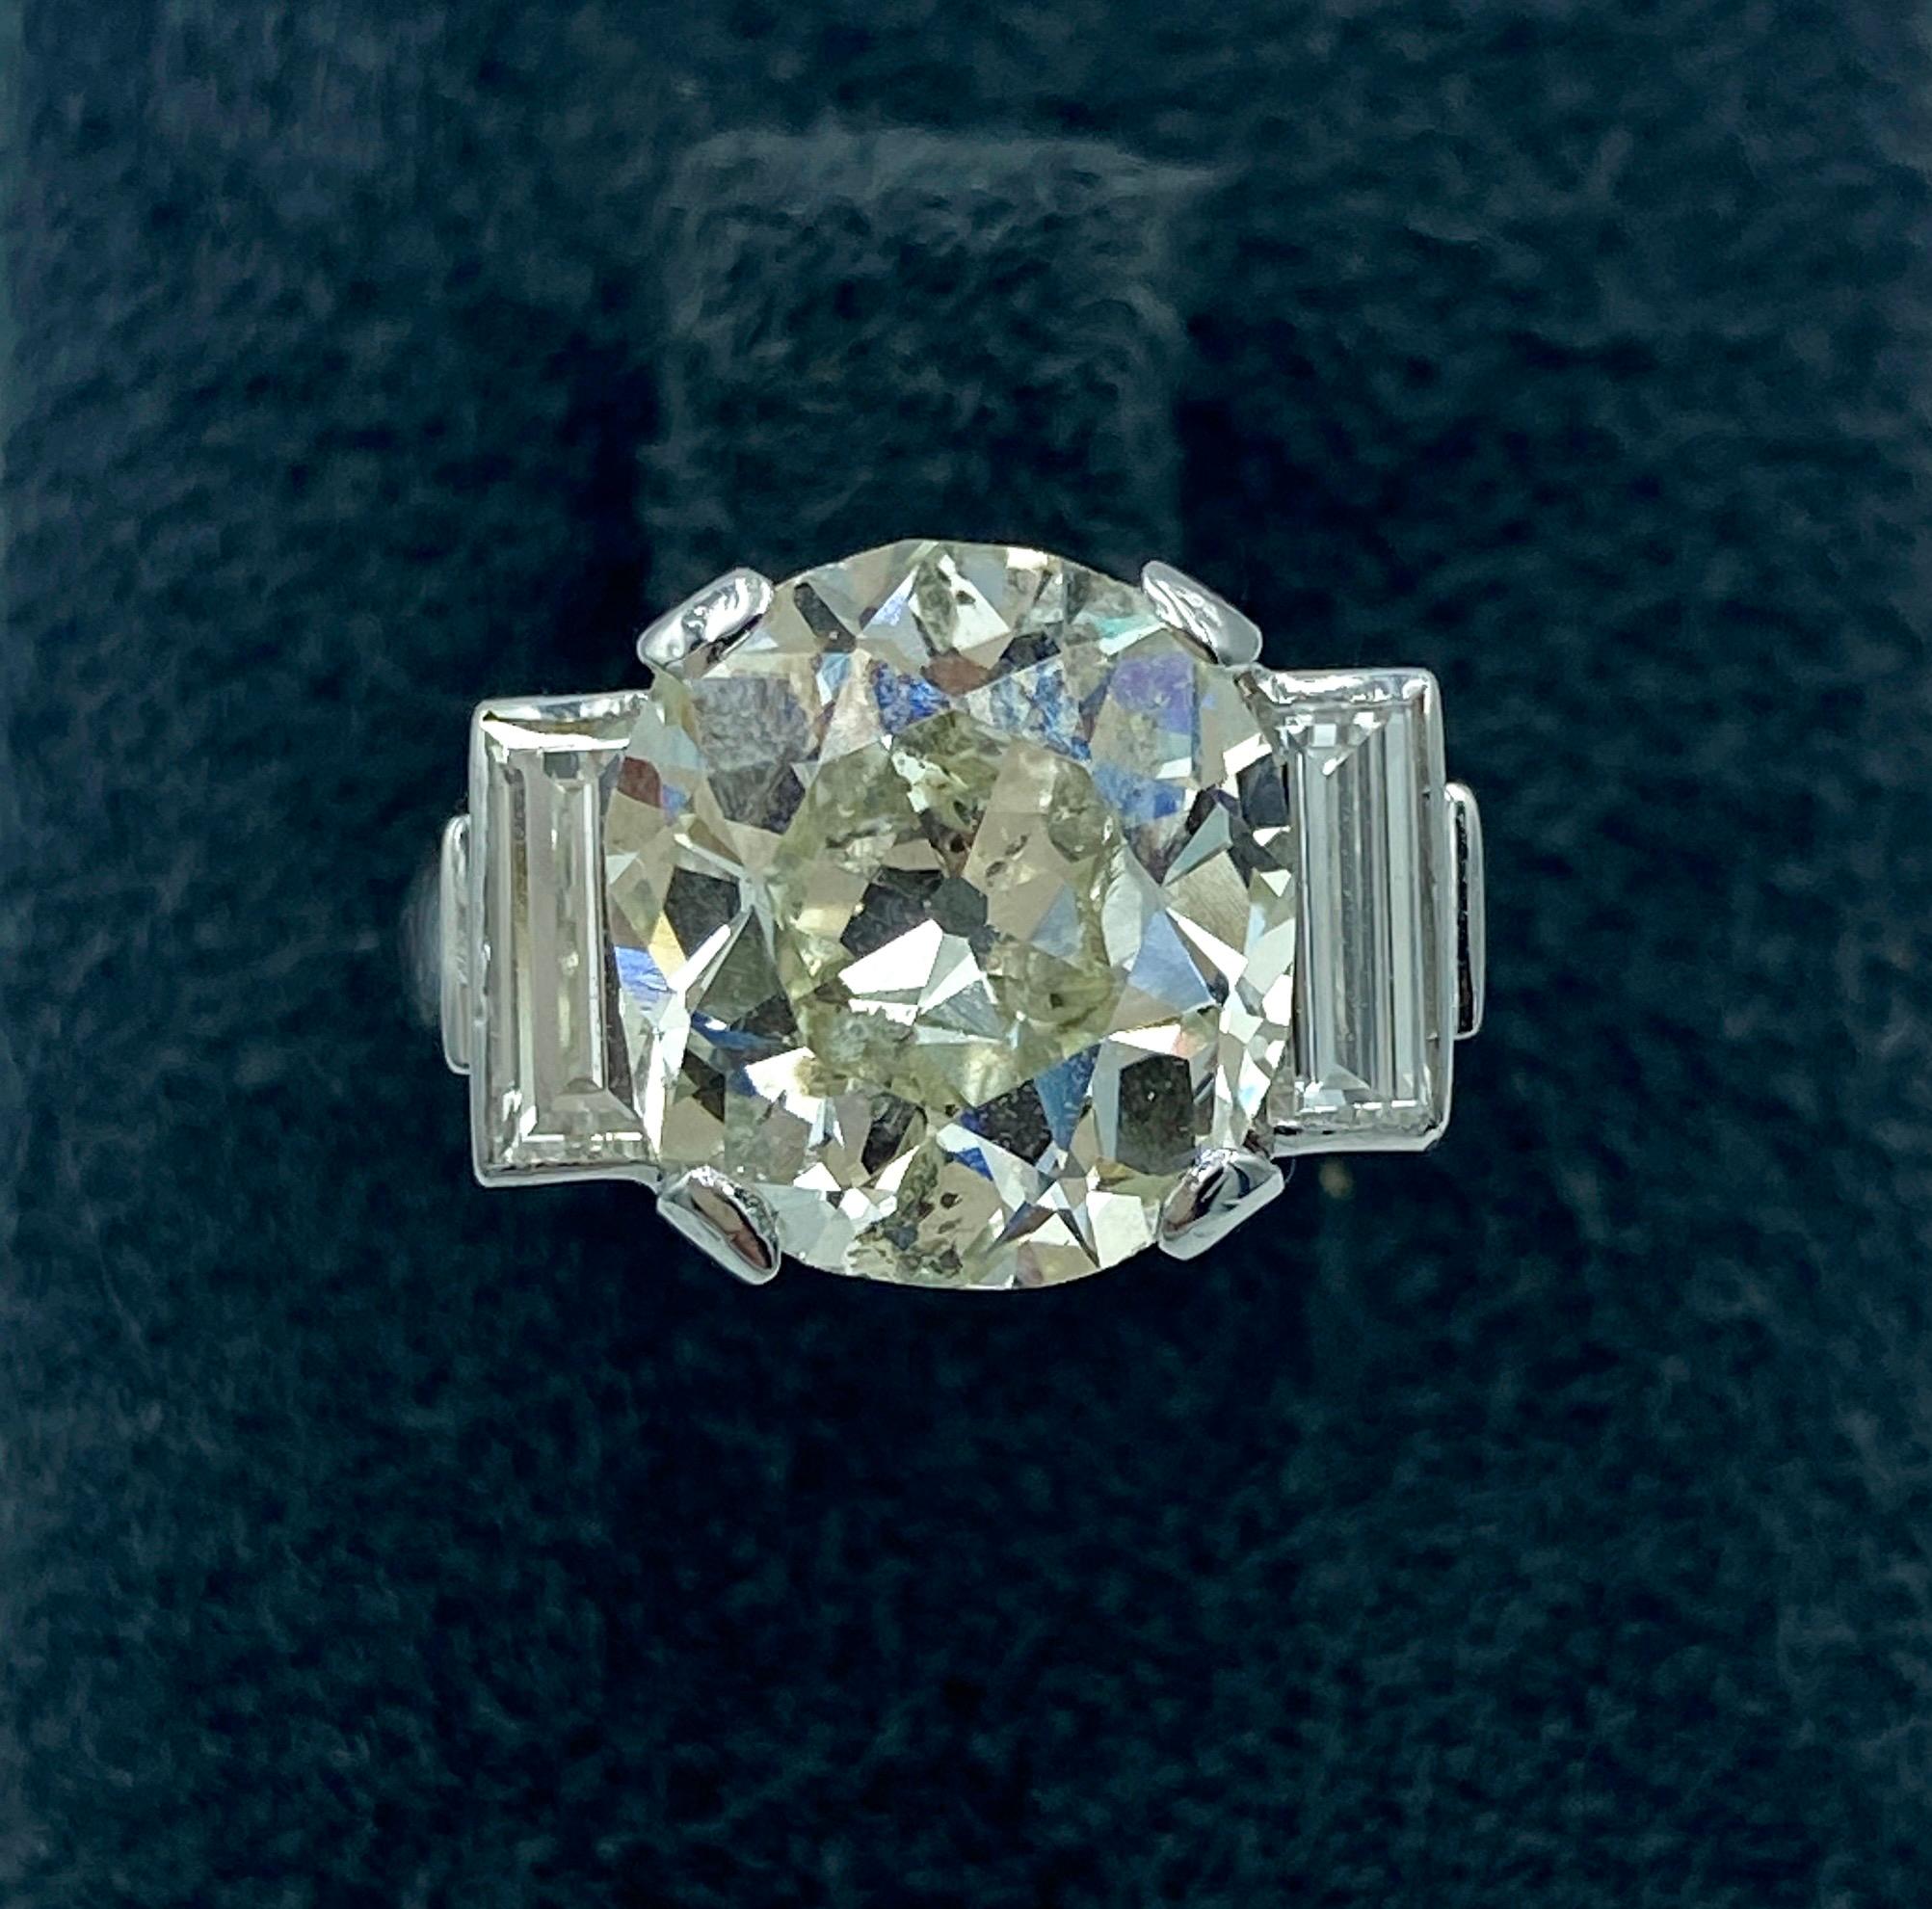 An outstanding French 1890's platinum engagement ring with an old mine cut centre diamond of 4.82 carat and 2 baguettes of 0.6 carat. The centre stone is H-I colour and SI clarity and the baguettes are E-F colour and VS clarity. Photographs of the